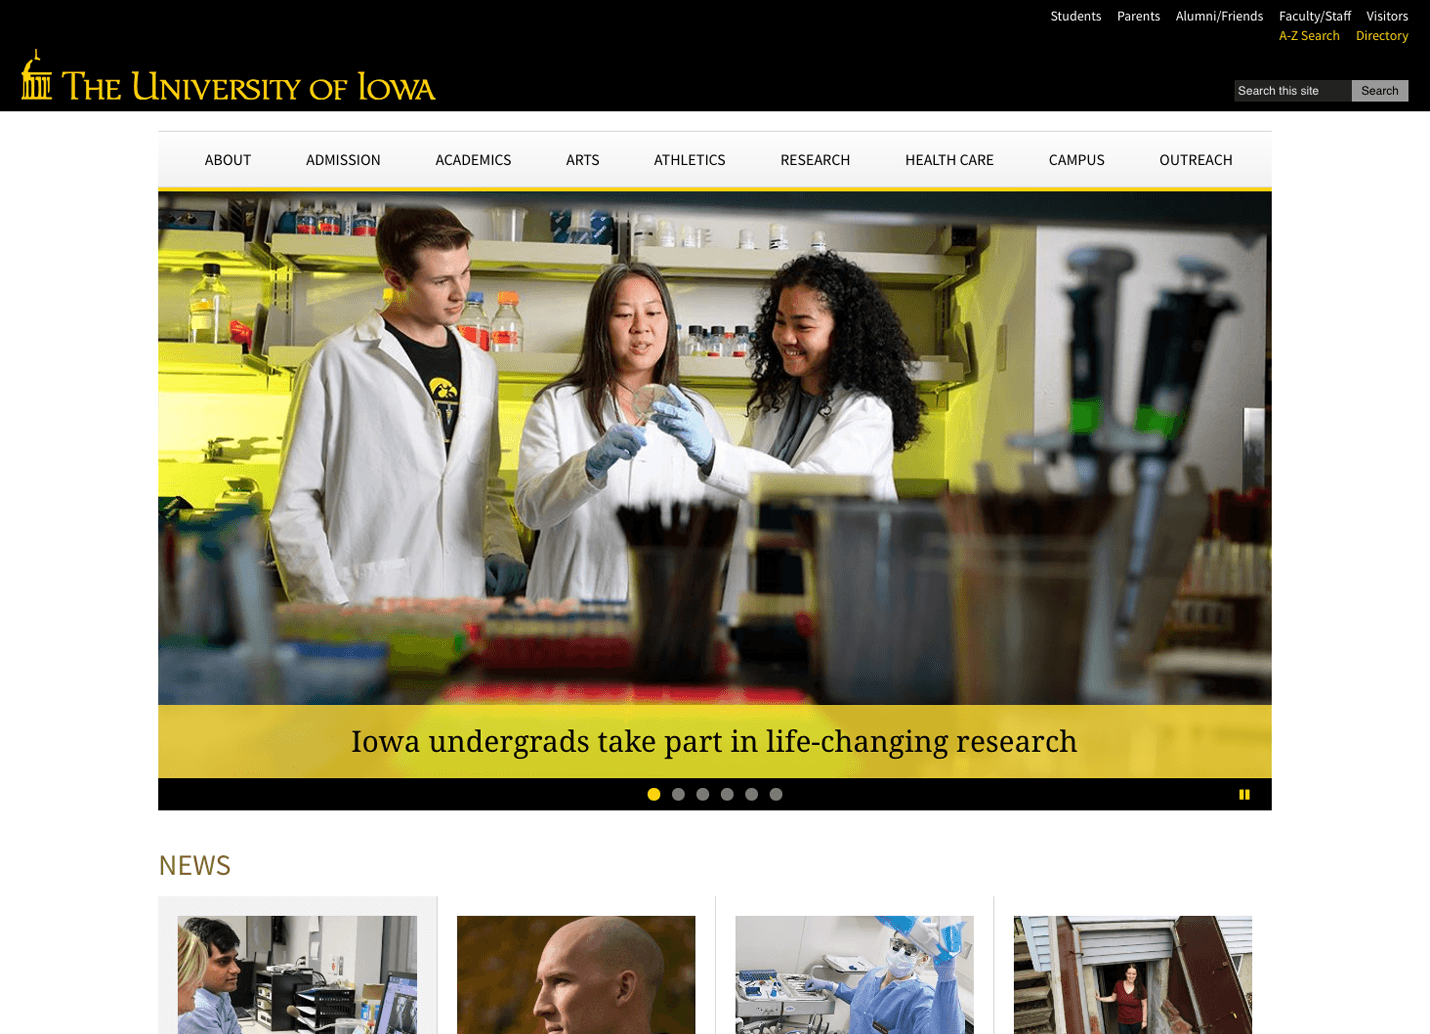 The University of Iowa Website Home Page